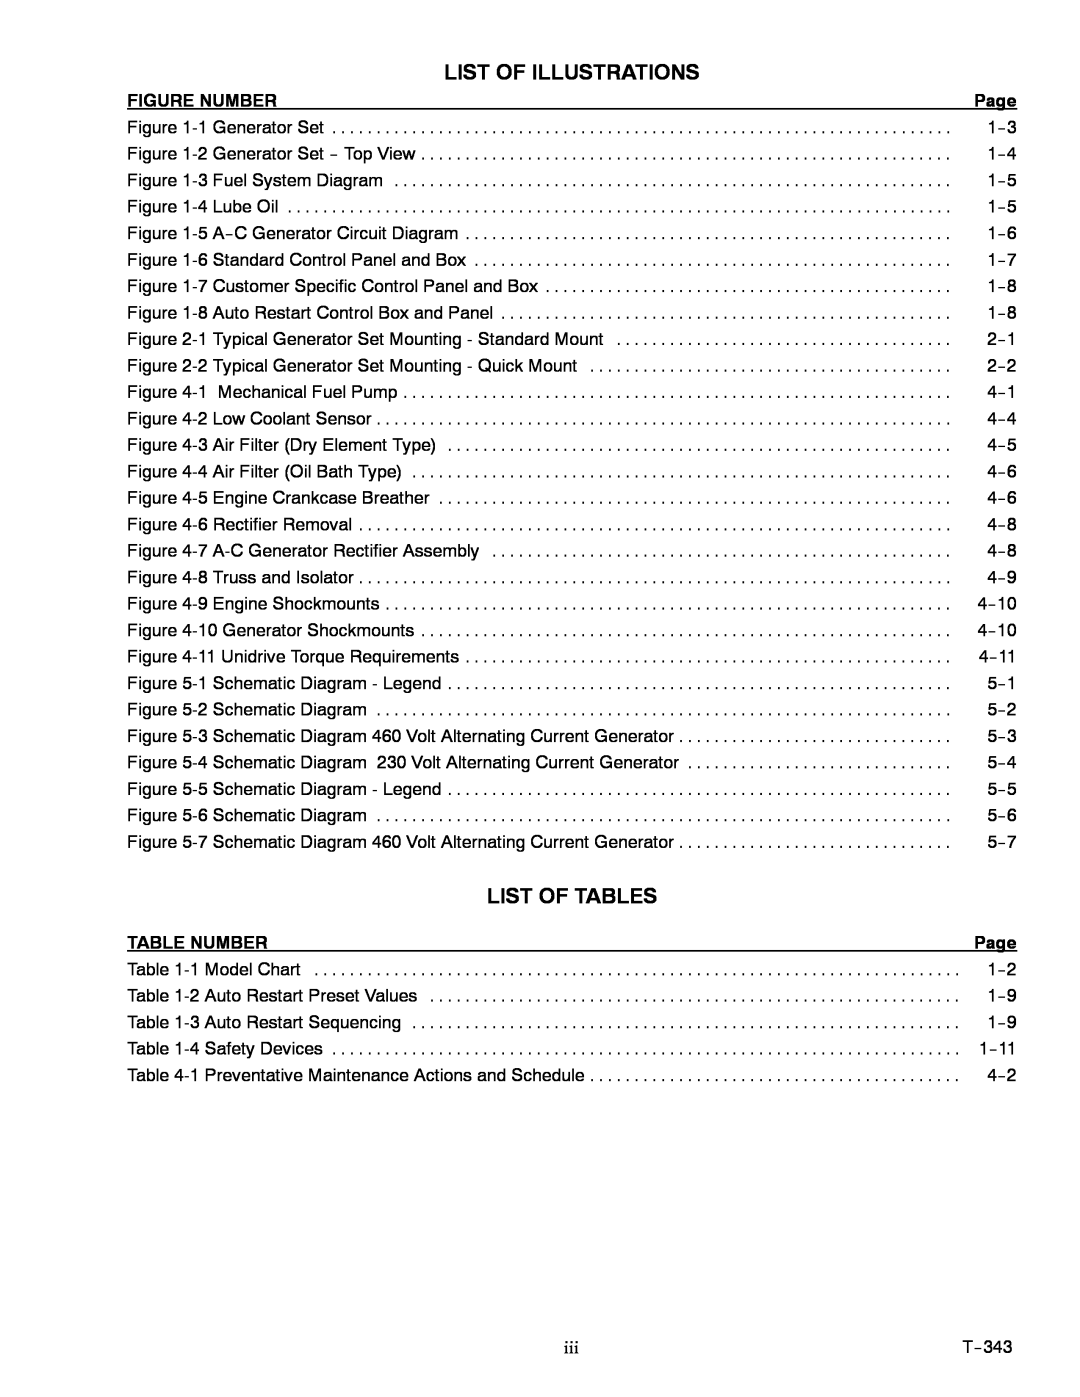 Carrier 69UG15 manual List Of Illustrations, List Of Tables, Figure Number, Table Number, Page 